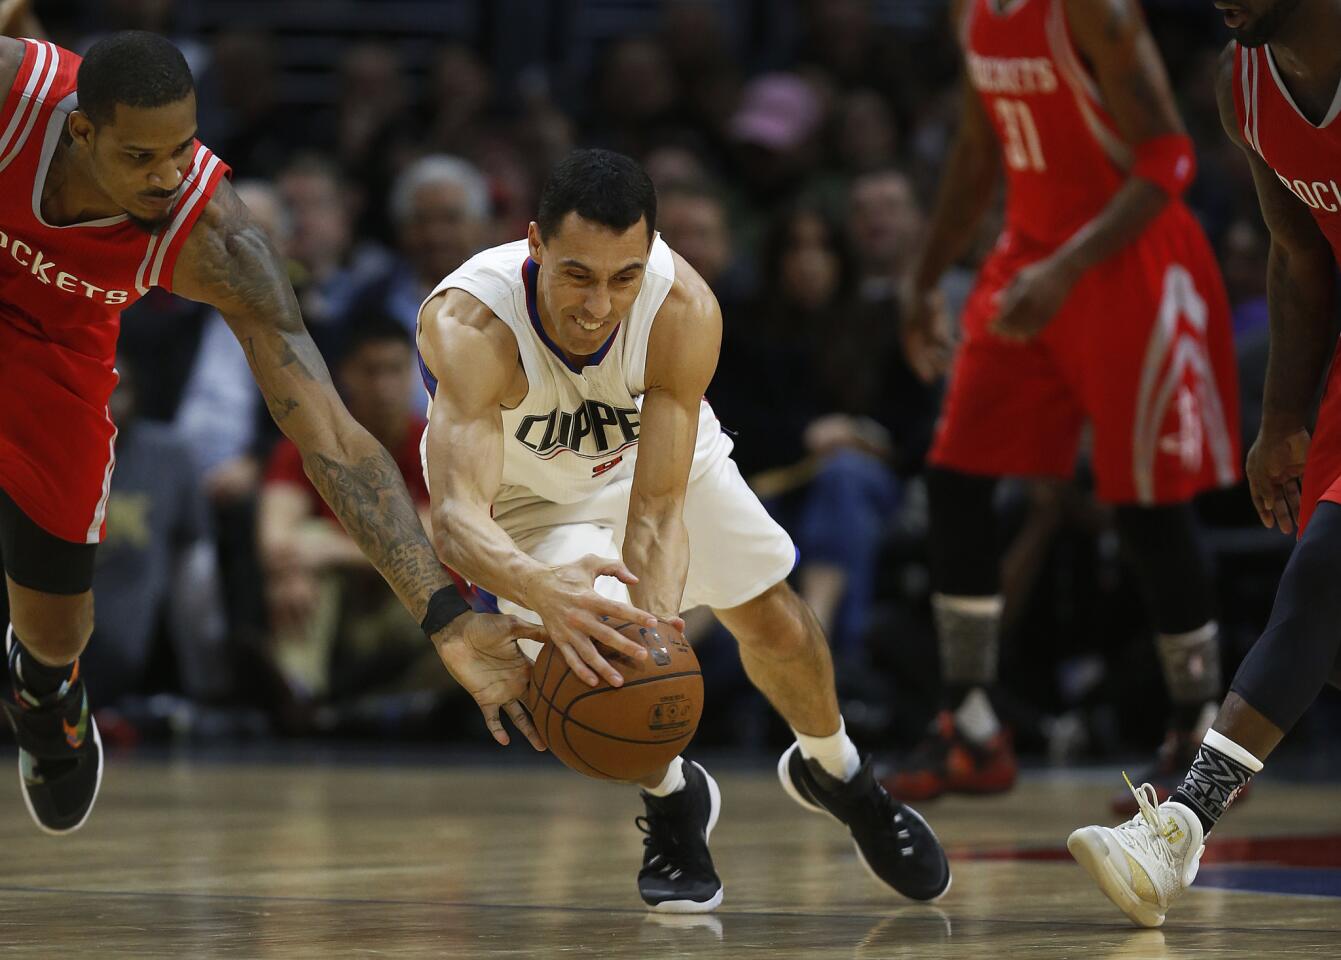 Los Angeles Clippers' Pablo Prigioni goes after a loose ball during the game against the Houston Rockets on Monday.